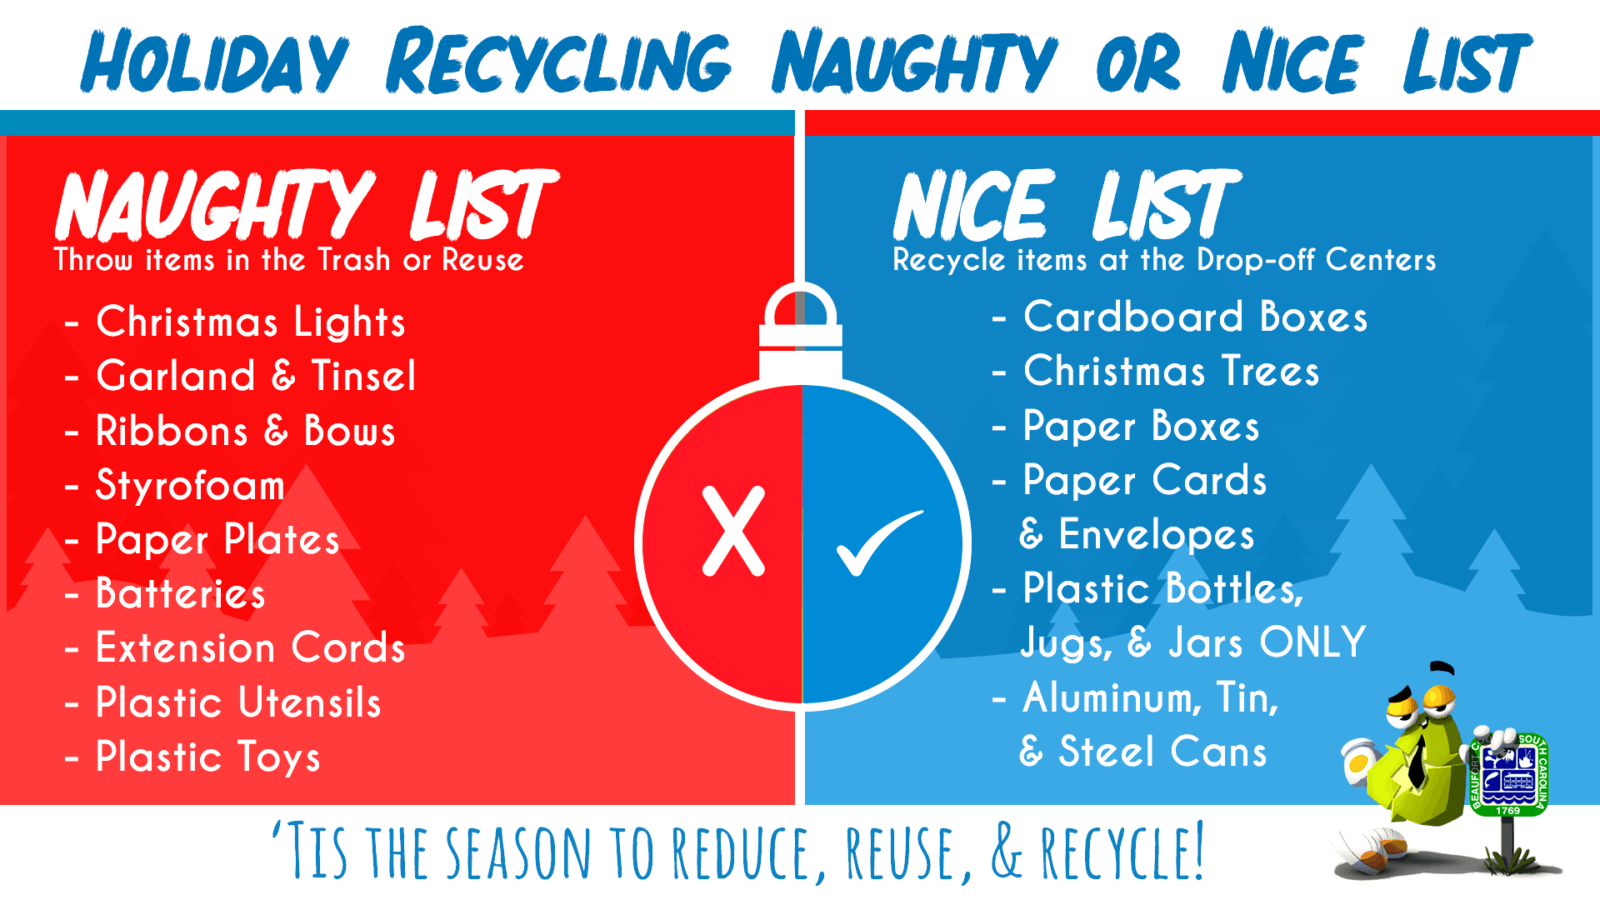 Recycle the holidays - resources and tips for recycling after the